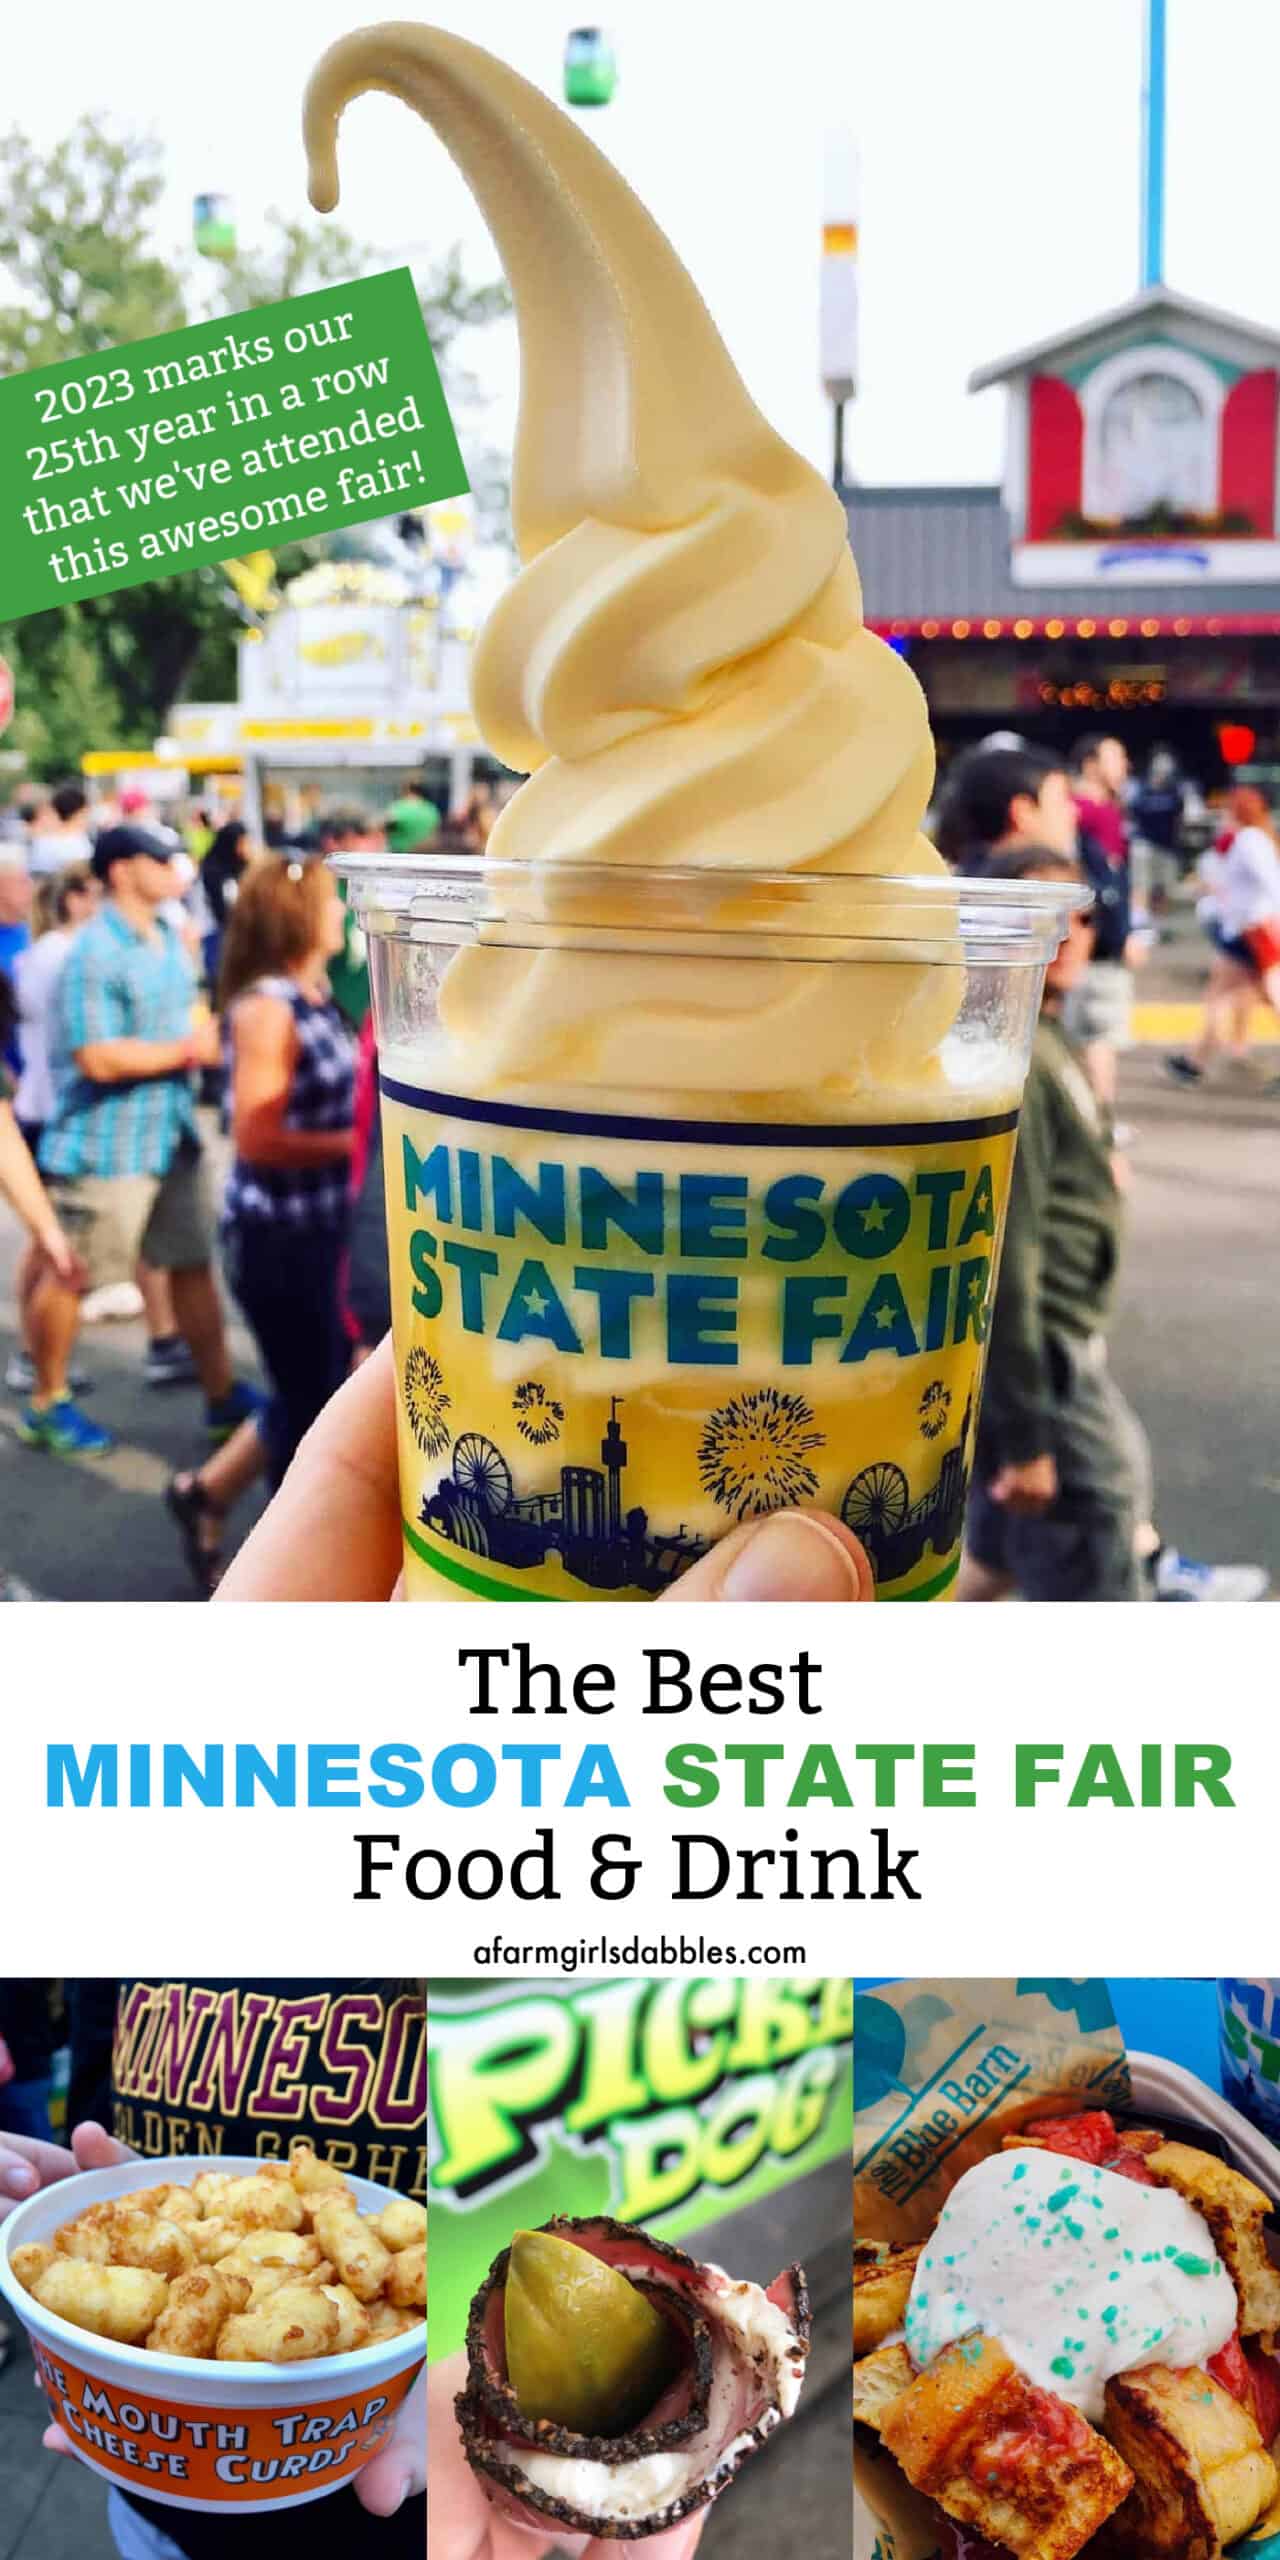 Pinterest image for best Minnesota State Fair food and drink 2023